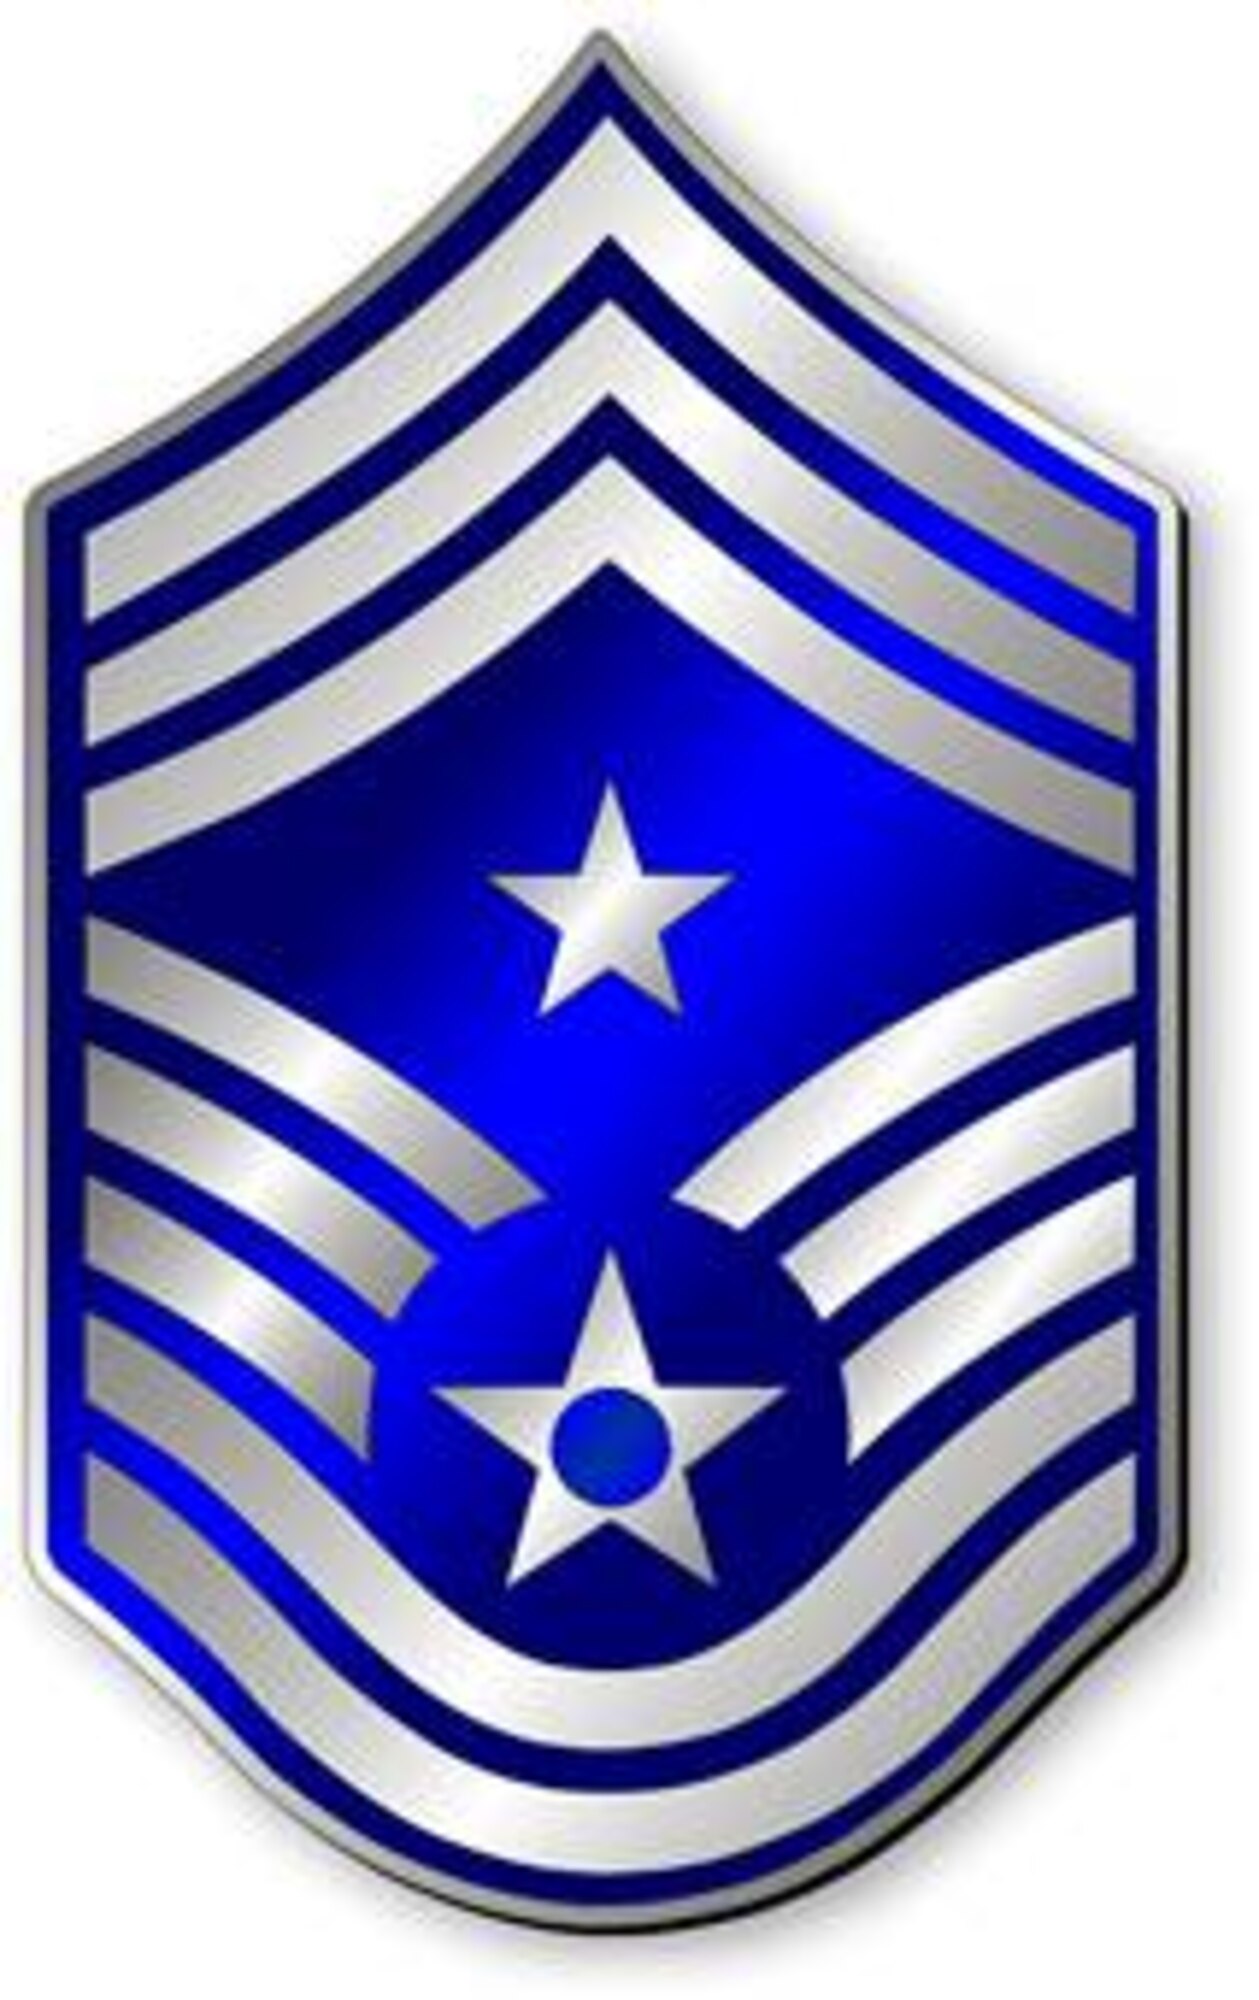 Command Chief Master Sergeant, CMSgt Stripes (Metallic).  Insignia provided by ITC(SW) MIke Purcell.